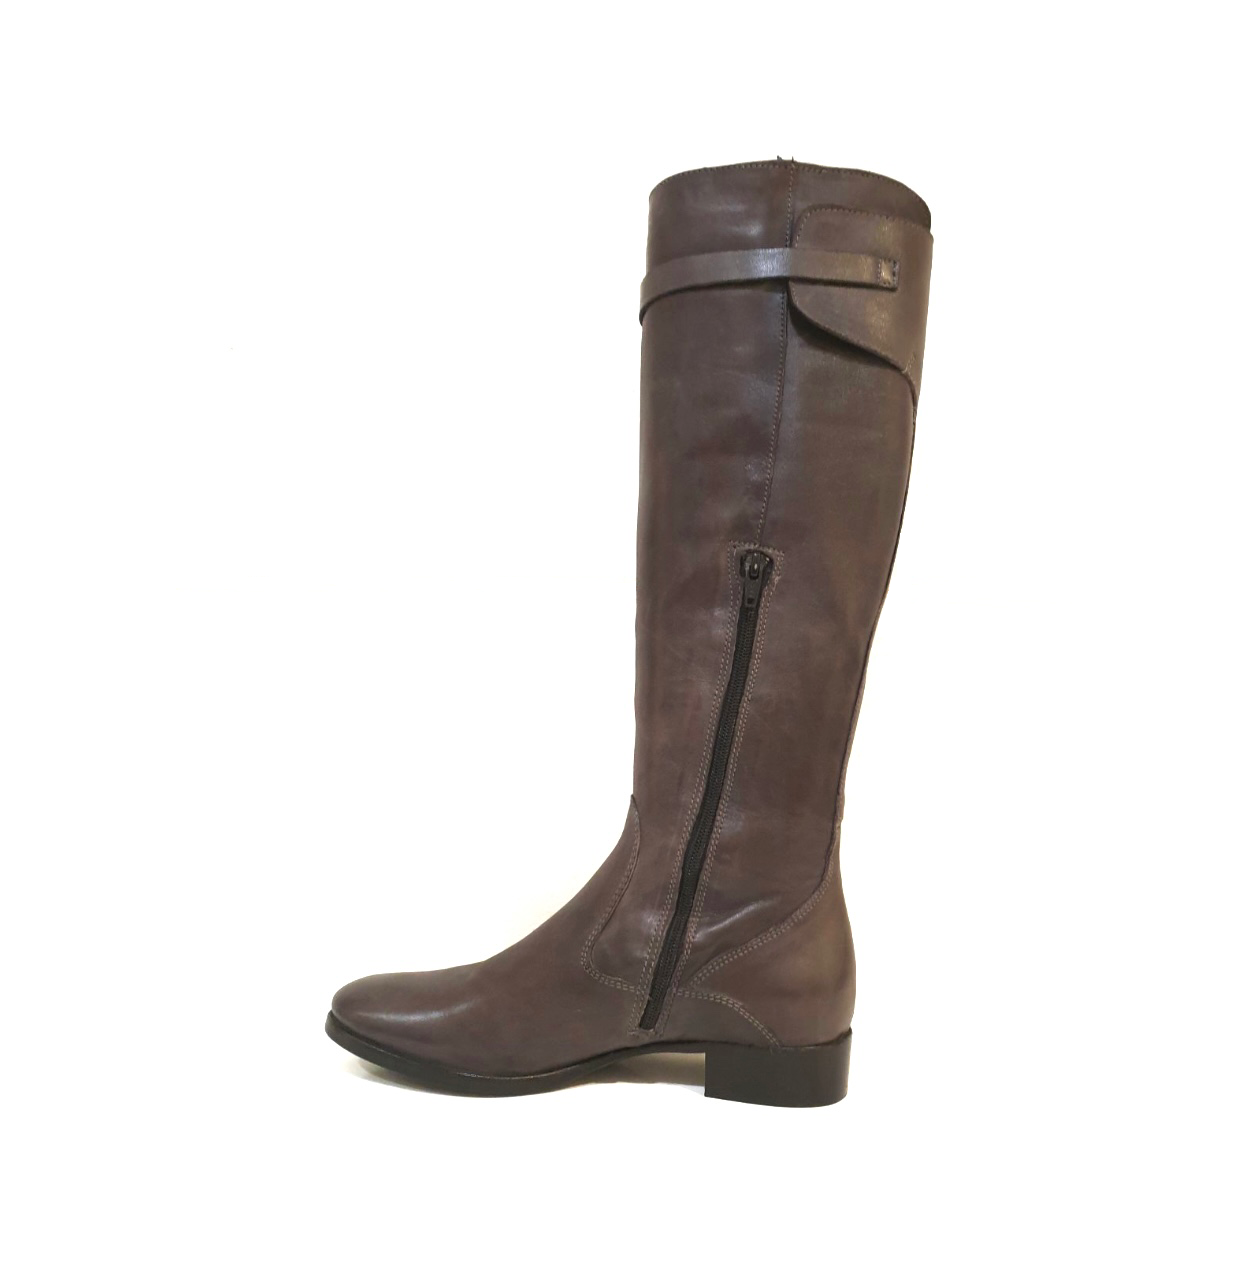 Progetto A290 Toffy Cereze Brown Buckle Zip Knee High Boot Made In Italy